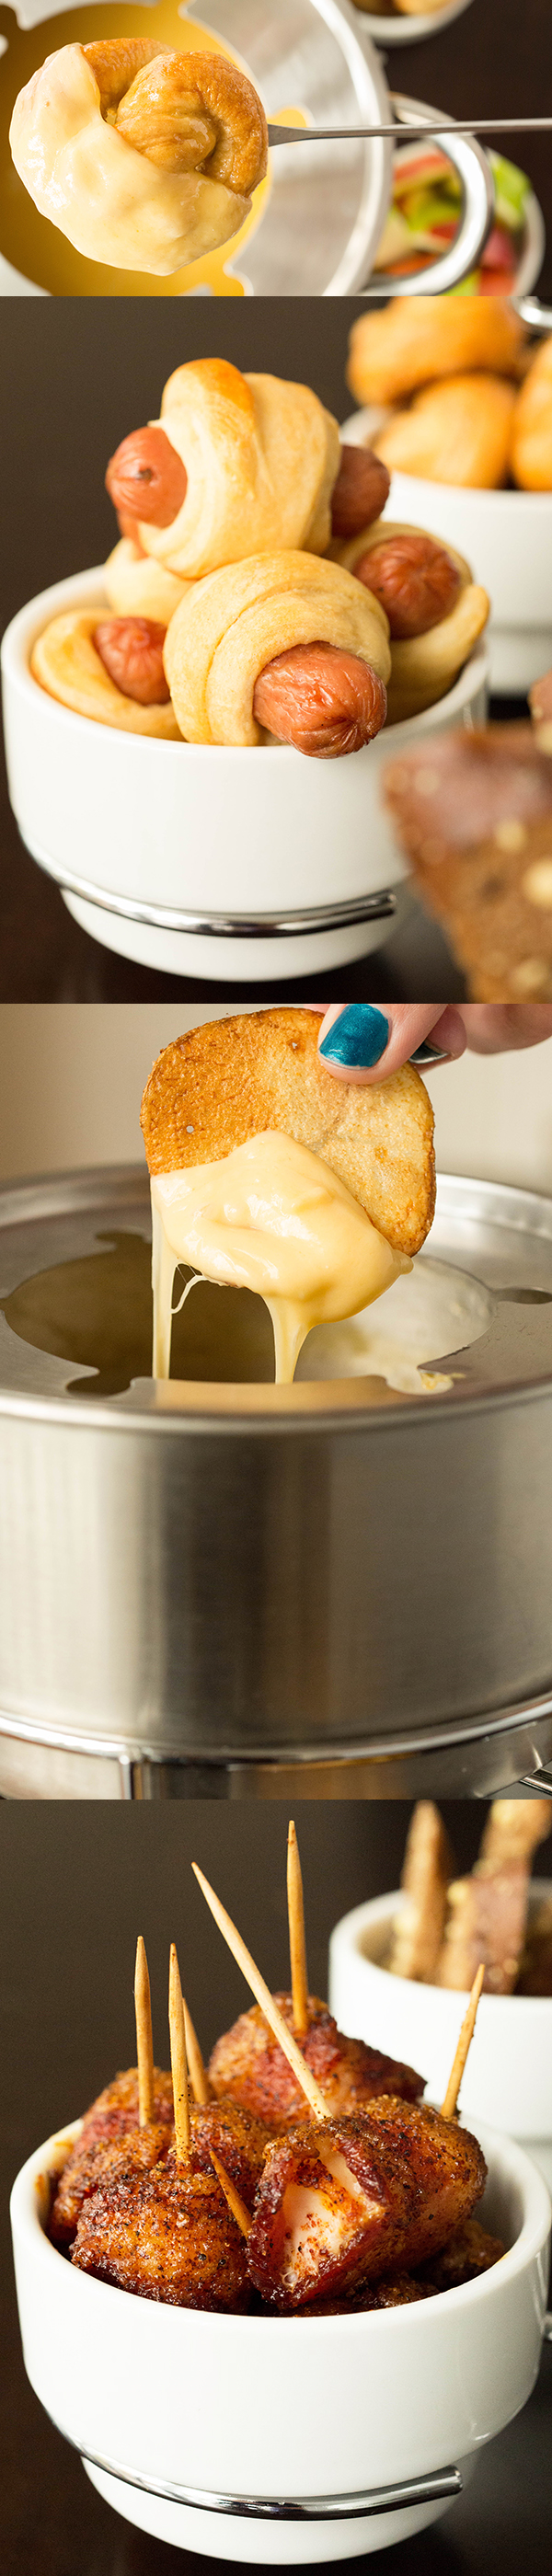 Beer Cheese Fondue made with garlic, lager beer, sharp cheddar, and gruyere. Served with homemade mini soft pretzels.